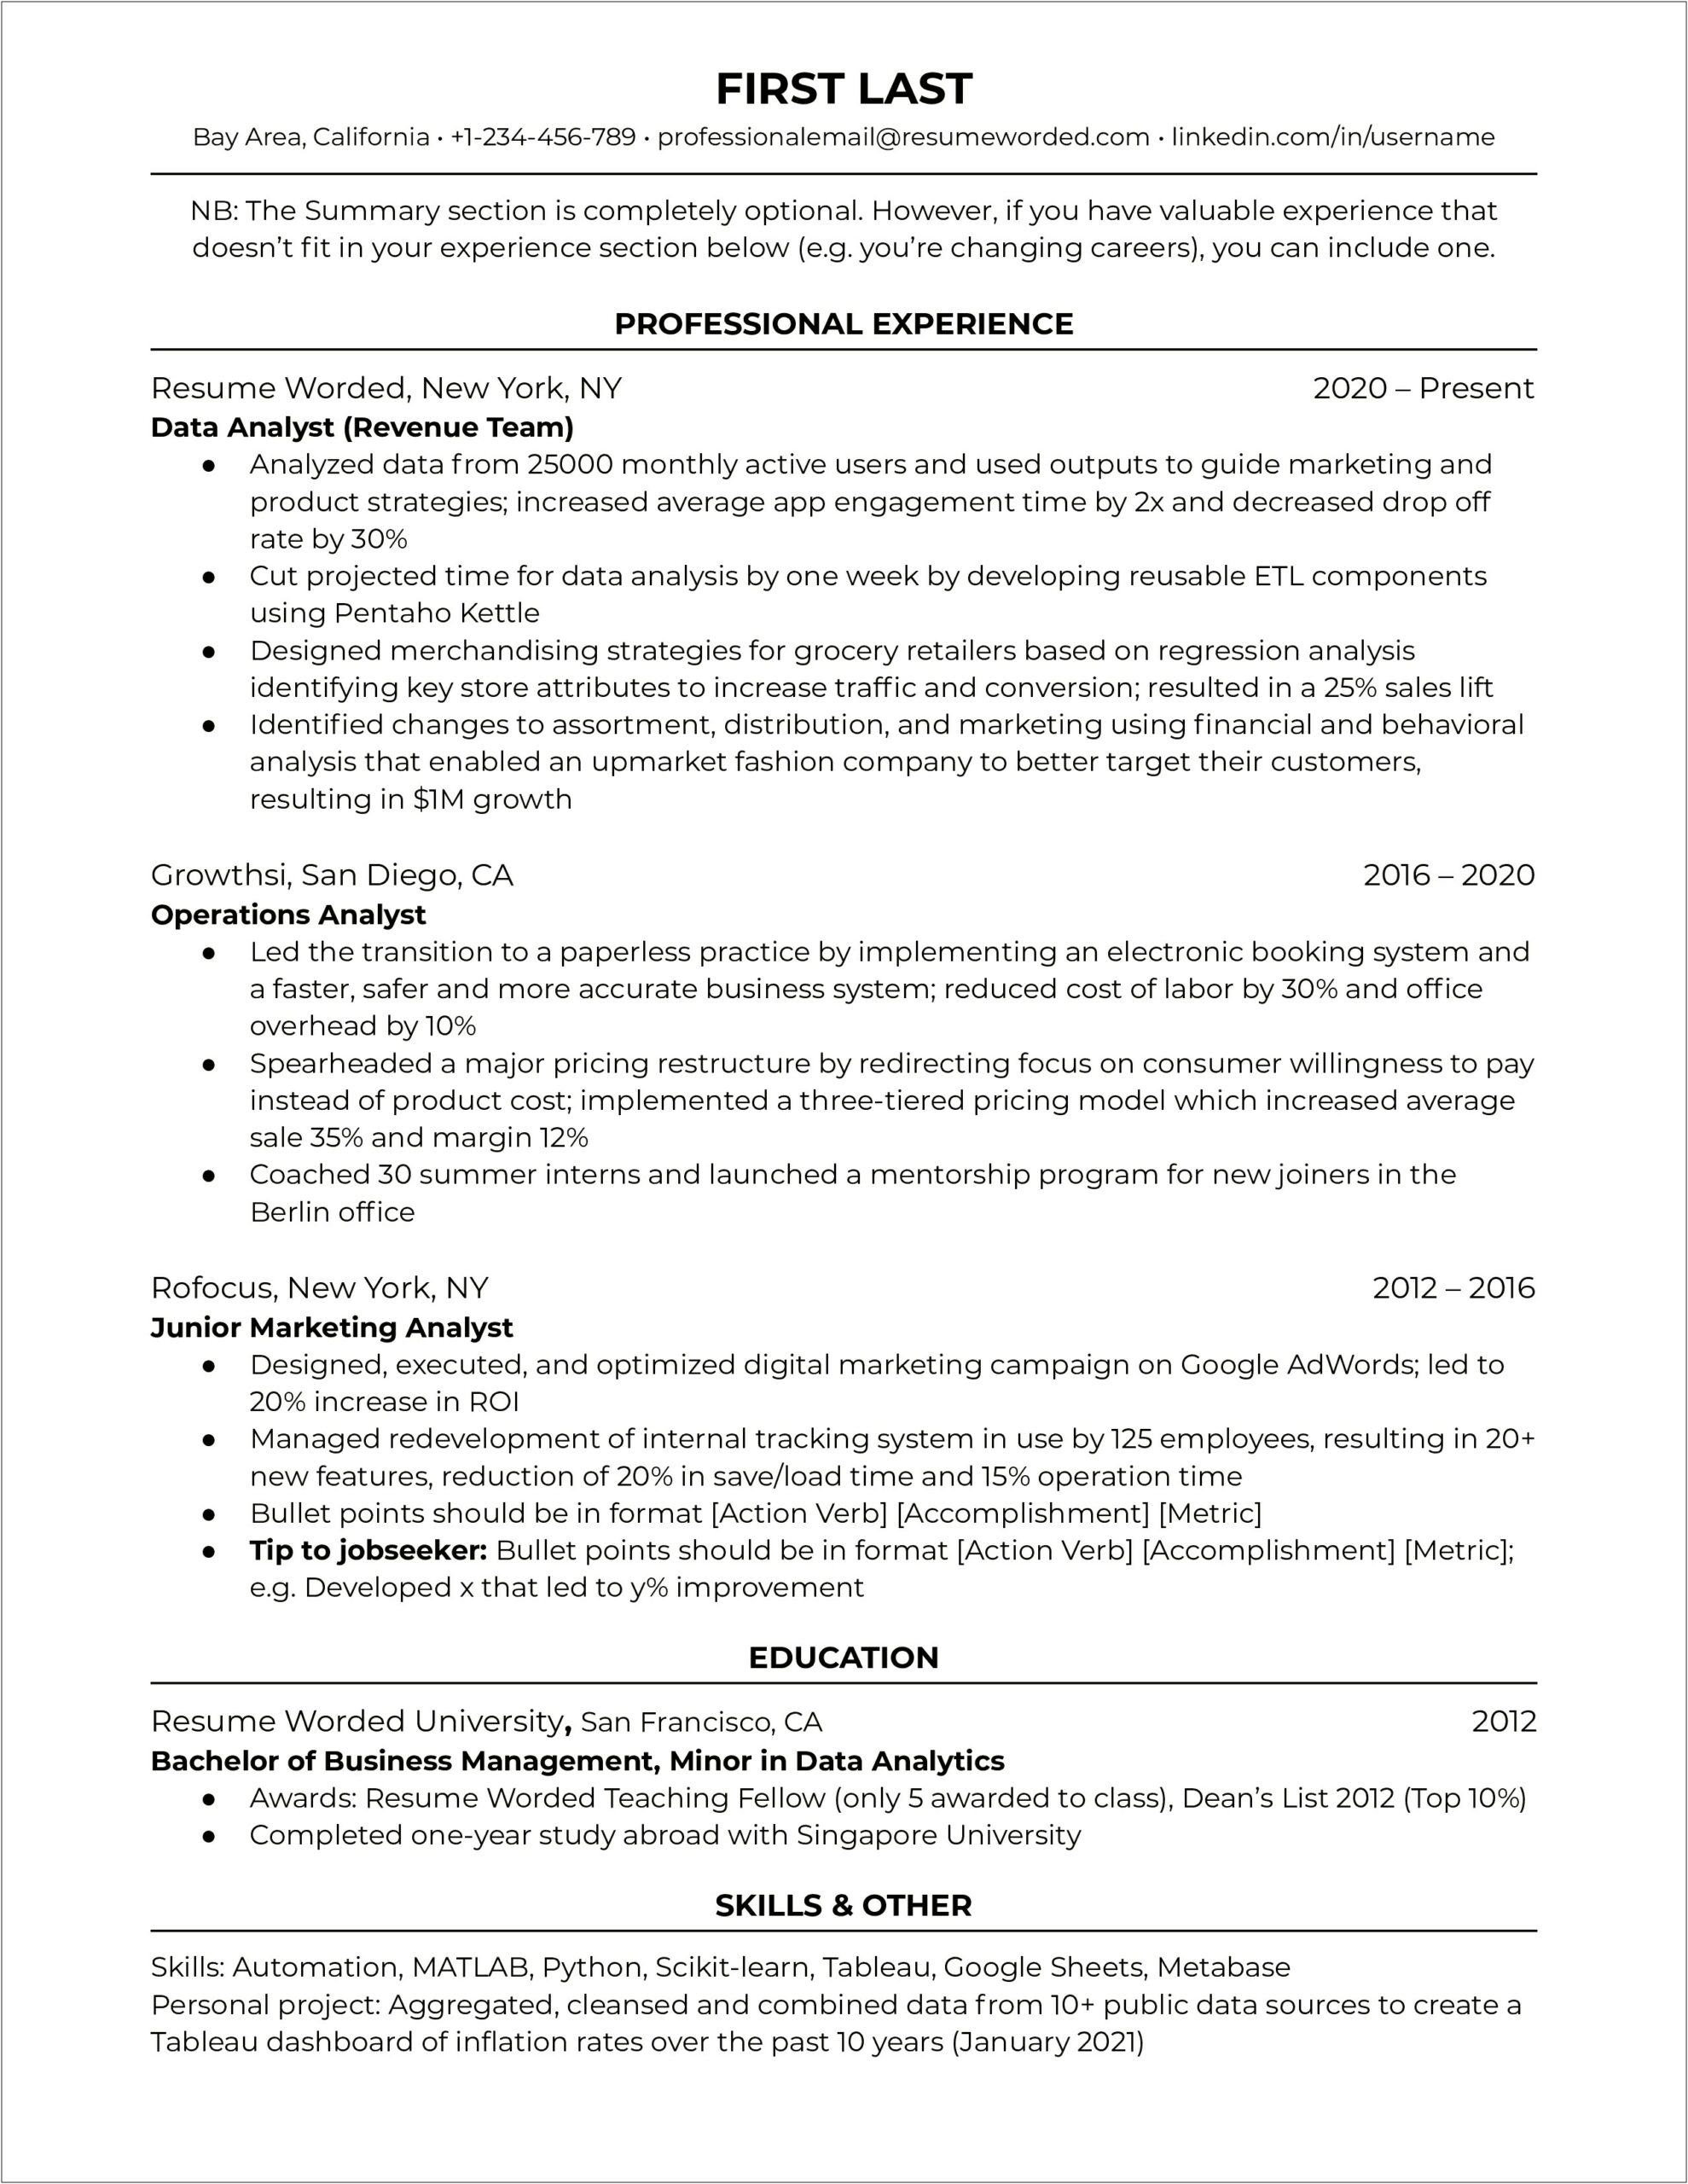 Do You Put Classes In Progress On Resume